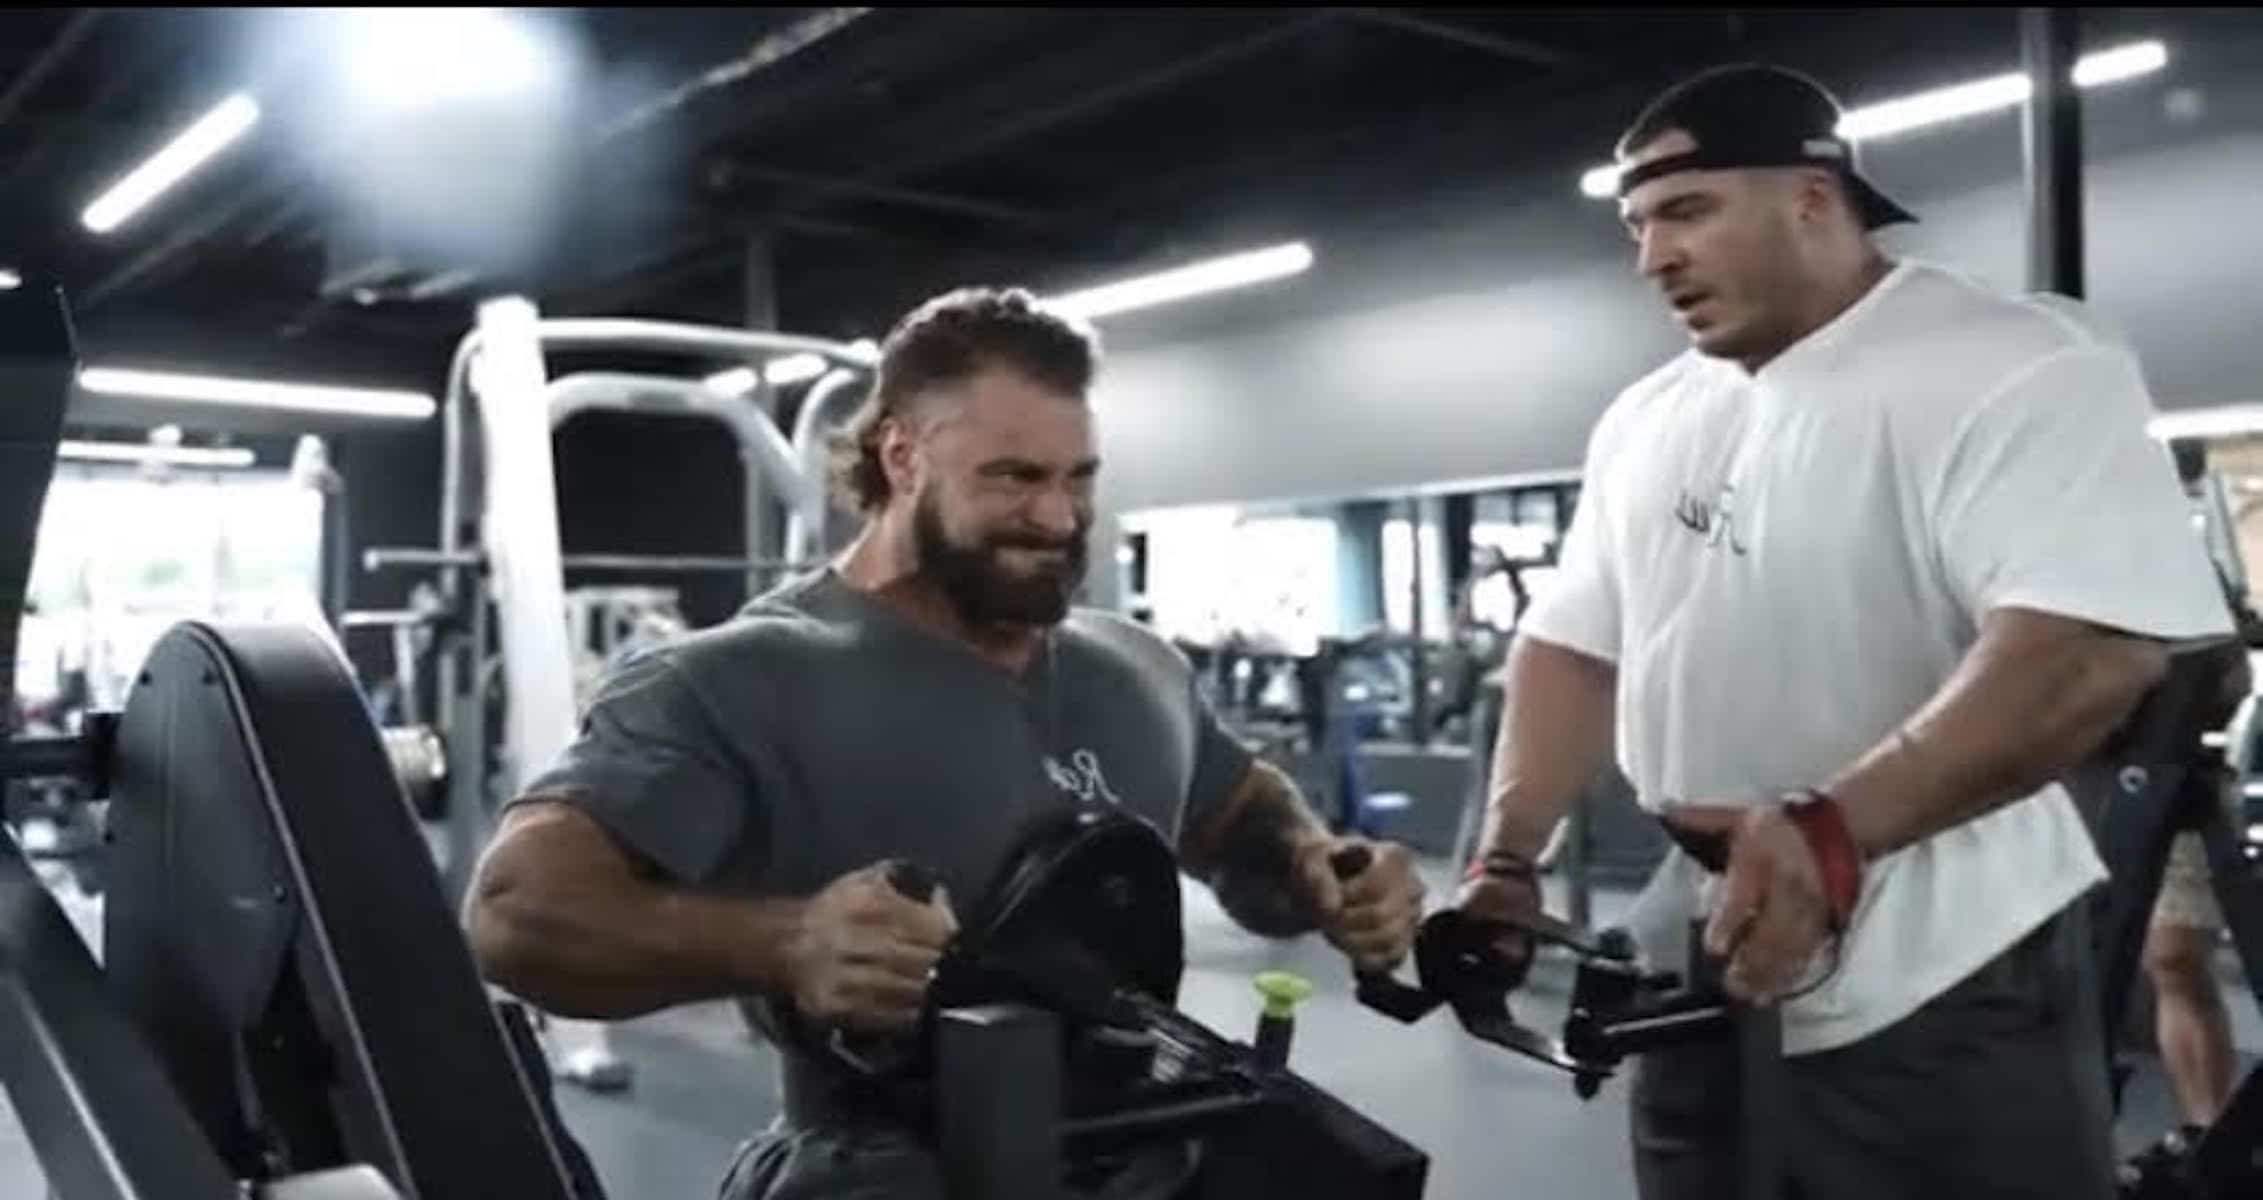 Chris Bumstead And Brett Wilkin Put Together Back Workout To Build Size And Width